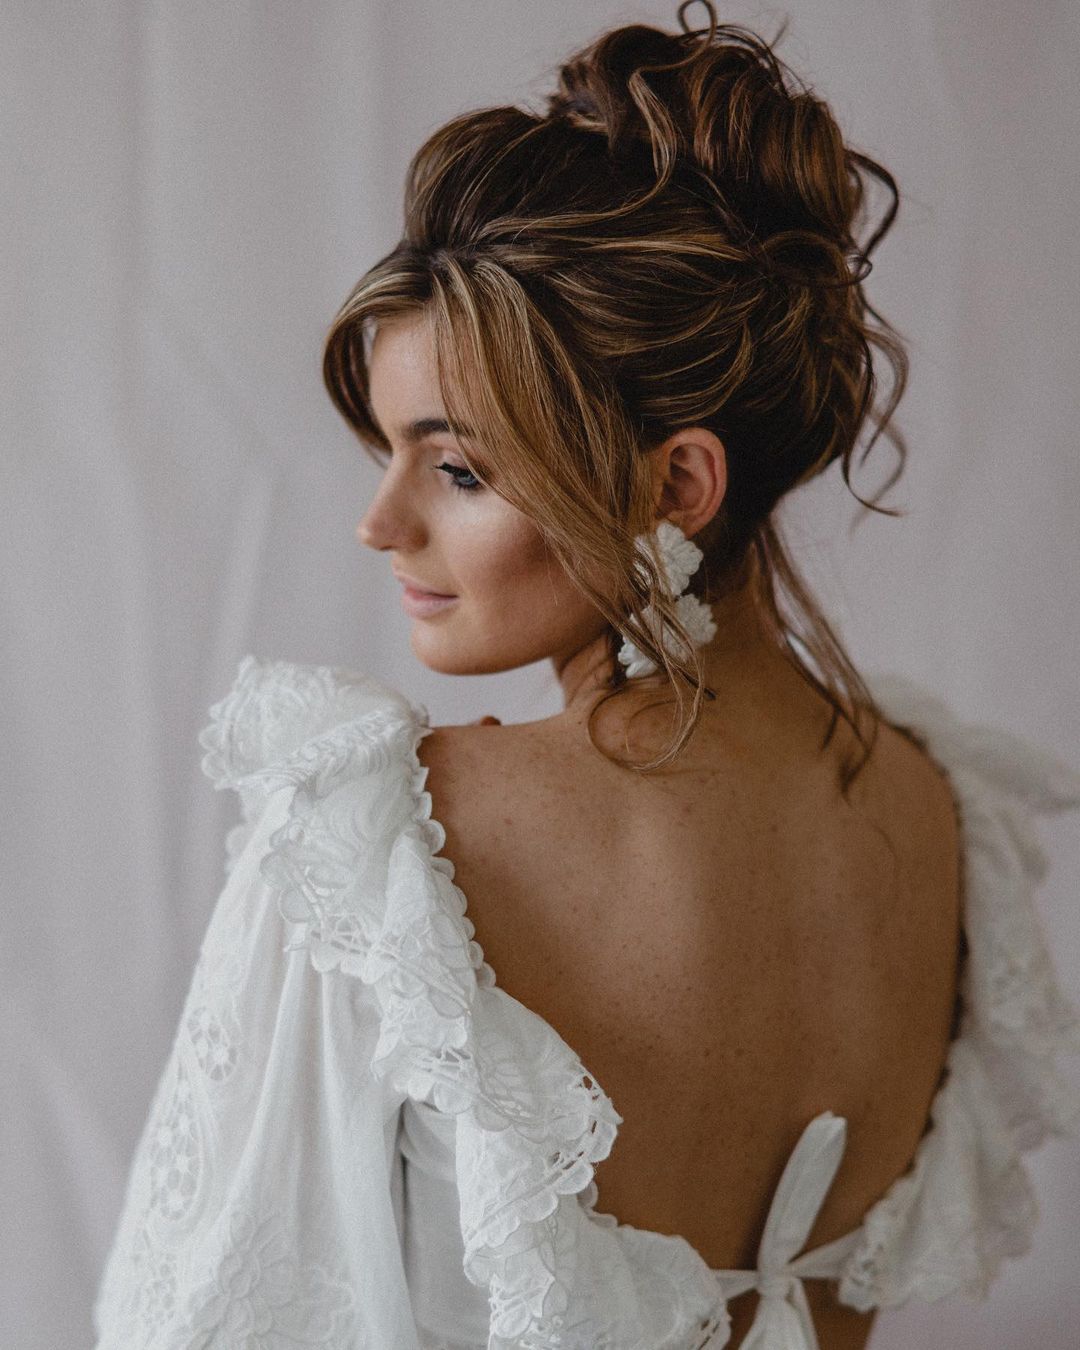 2023 Wedding Hair Trends for an Impeccable Bridal Hairstyle